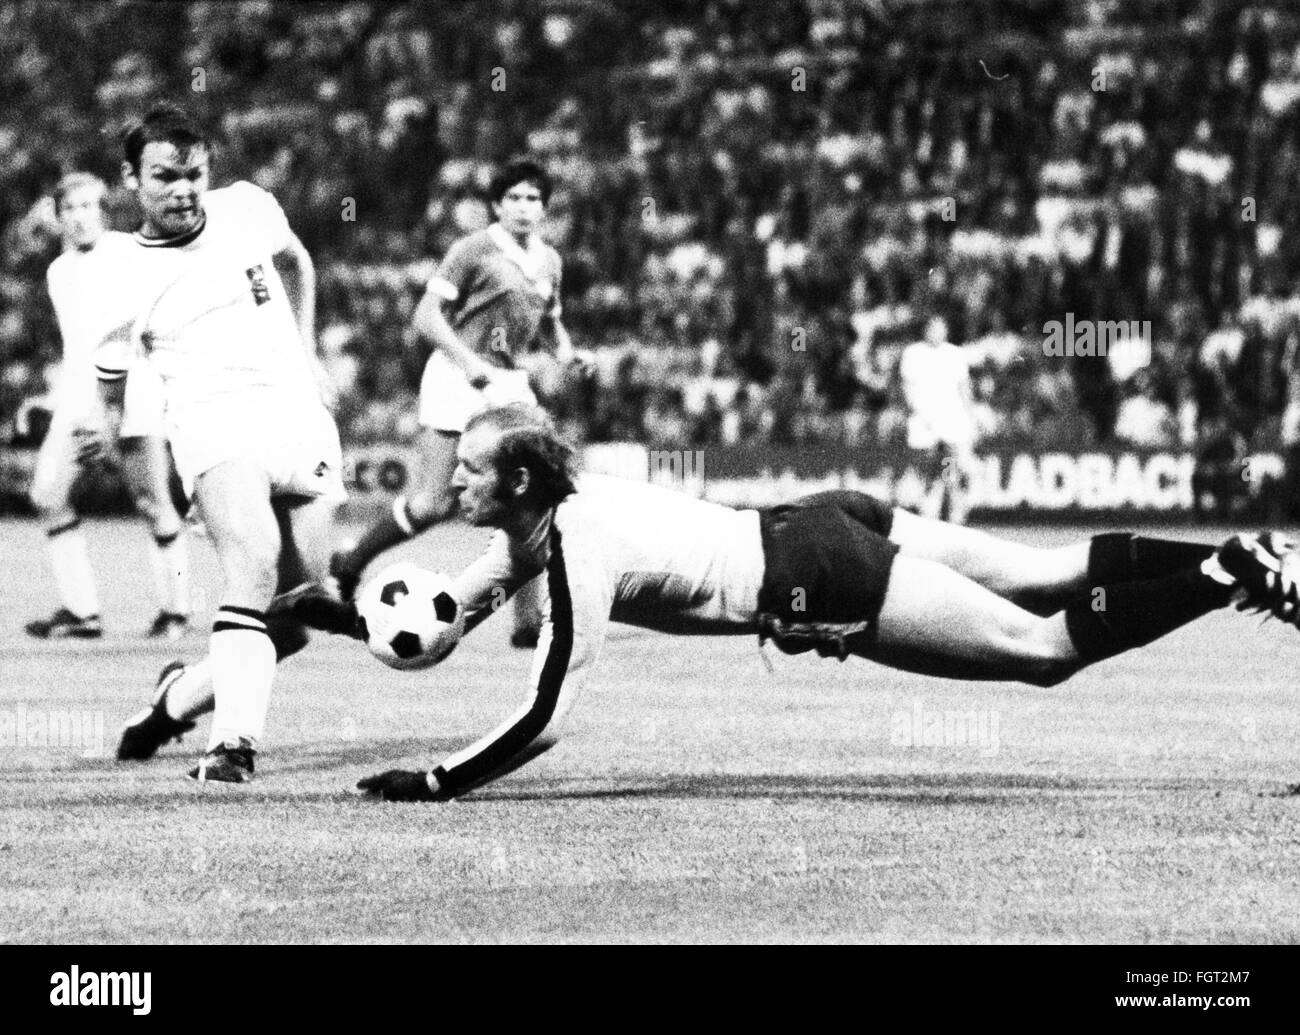 sports,football,games,Germany,DFB-Pokal 1969 / 1970,quarter final,game Borussia Moenchengladbach versus 1. FC Koeln(2:3),Boekelbergstadion,Gelsenkirchen,5.8.1970,goal keeper Manfred Manglitz(Cologne repelling the attack of striker Herbert Laumen,DFB cup,football match,soccer match,football matches,footballer,footballers,kicker,football player,football players,action,act,actions,acts,attack,offensive move,attacks,offensive moves,defences,defenses,defense,defence,save,military parade,running,run,runs,jumping,jumps,jump,pl,Additional-Rights-Clearences-Not Available Stock Photo